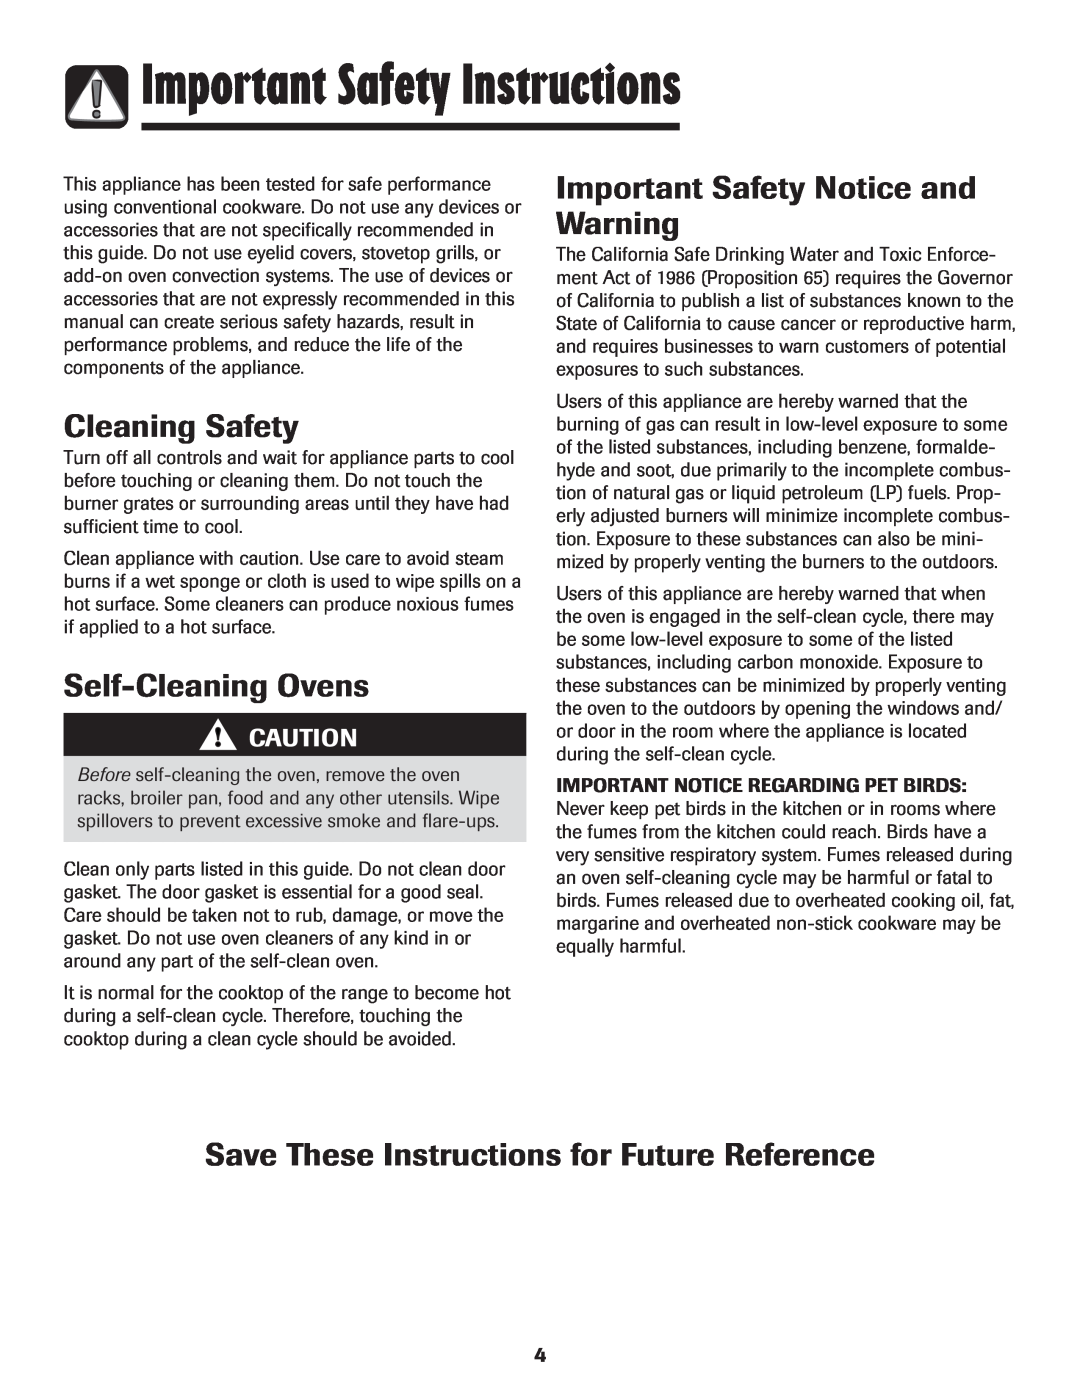 Maytag MGR6751BDW Cleaning Safety, Self-CleaningOvens, Important Safety Notice and Warning, Important Safety Instructions 